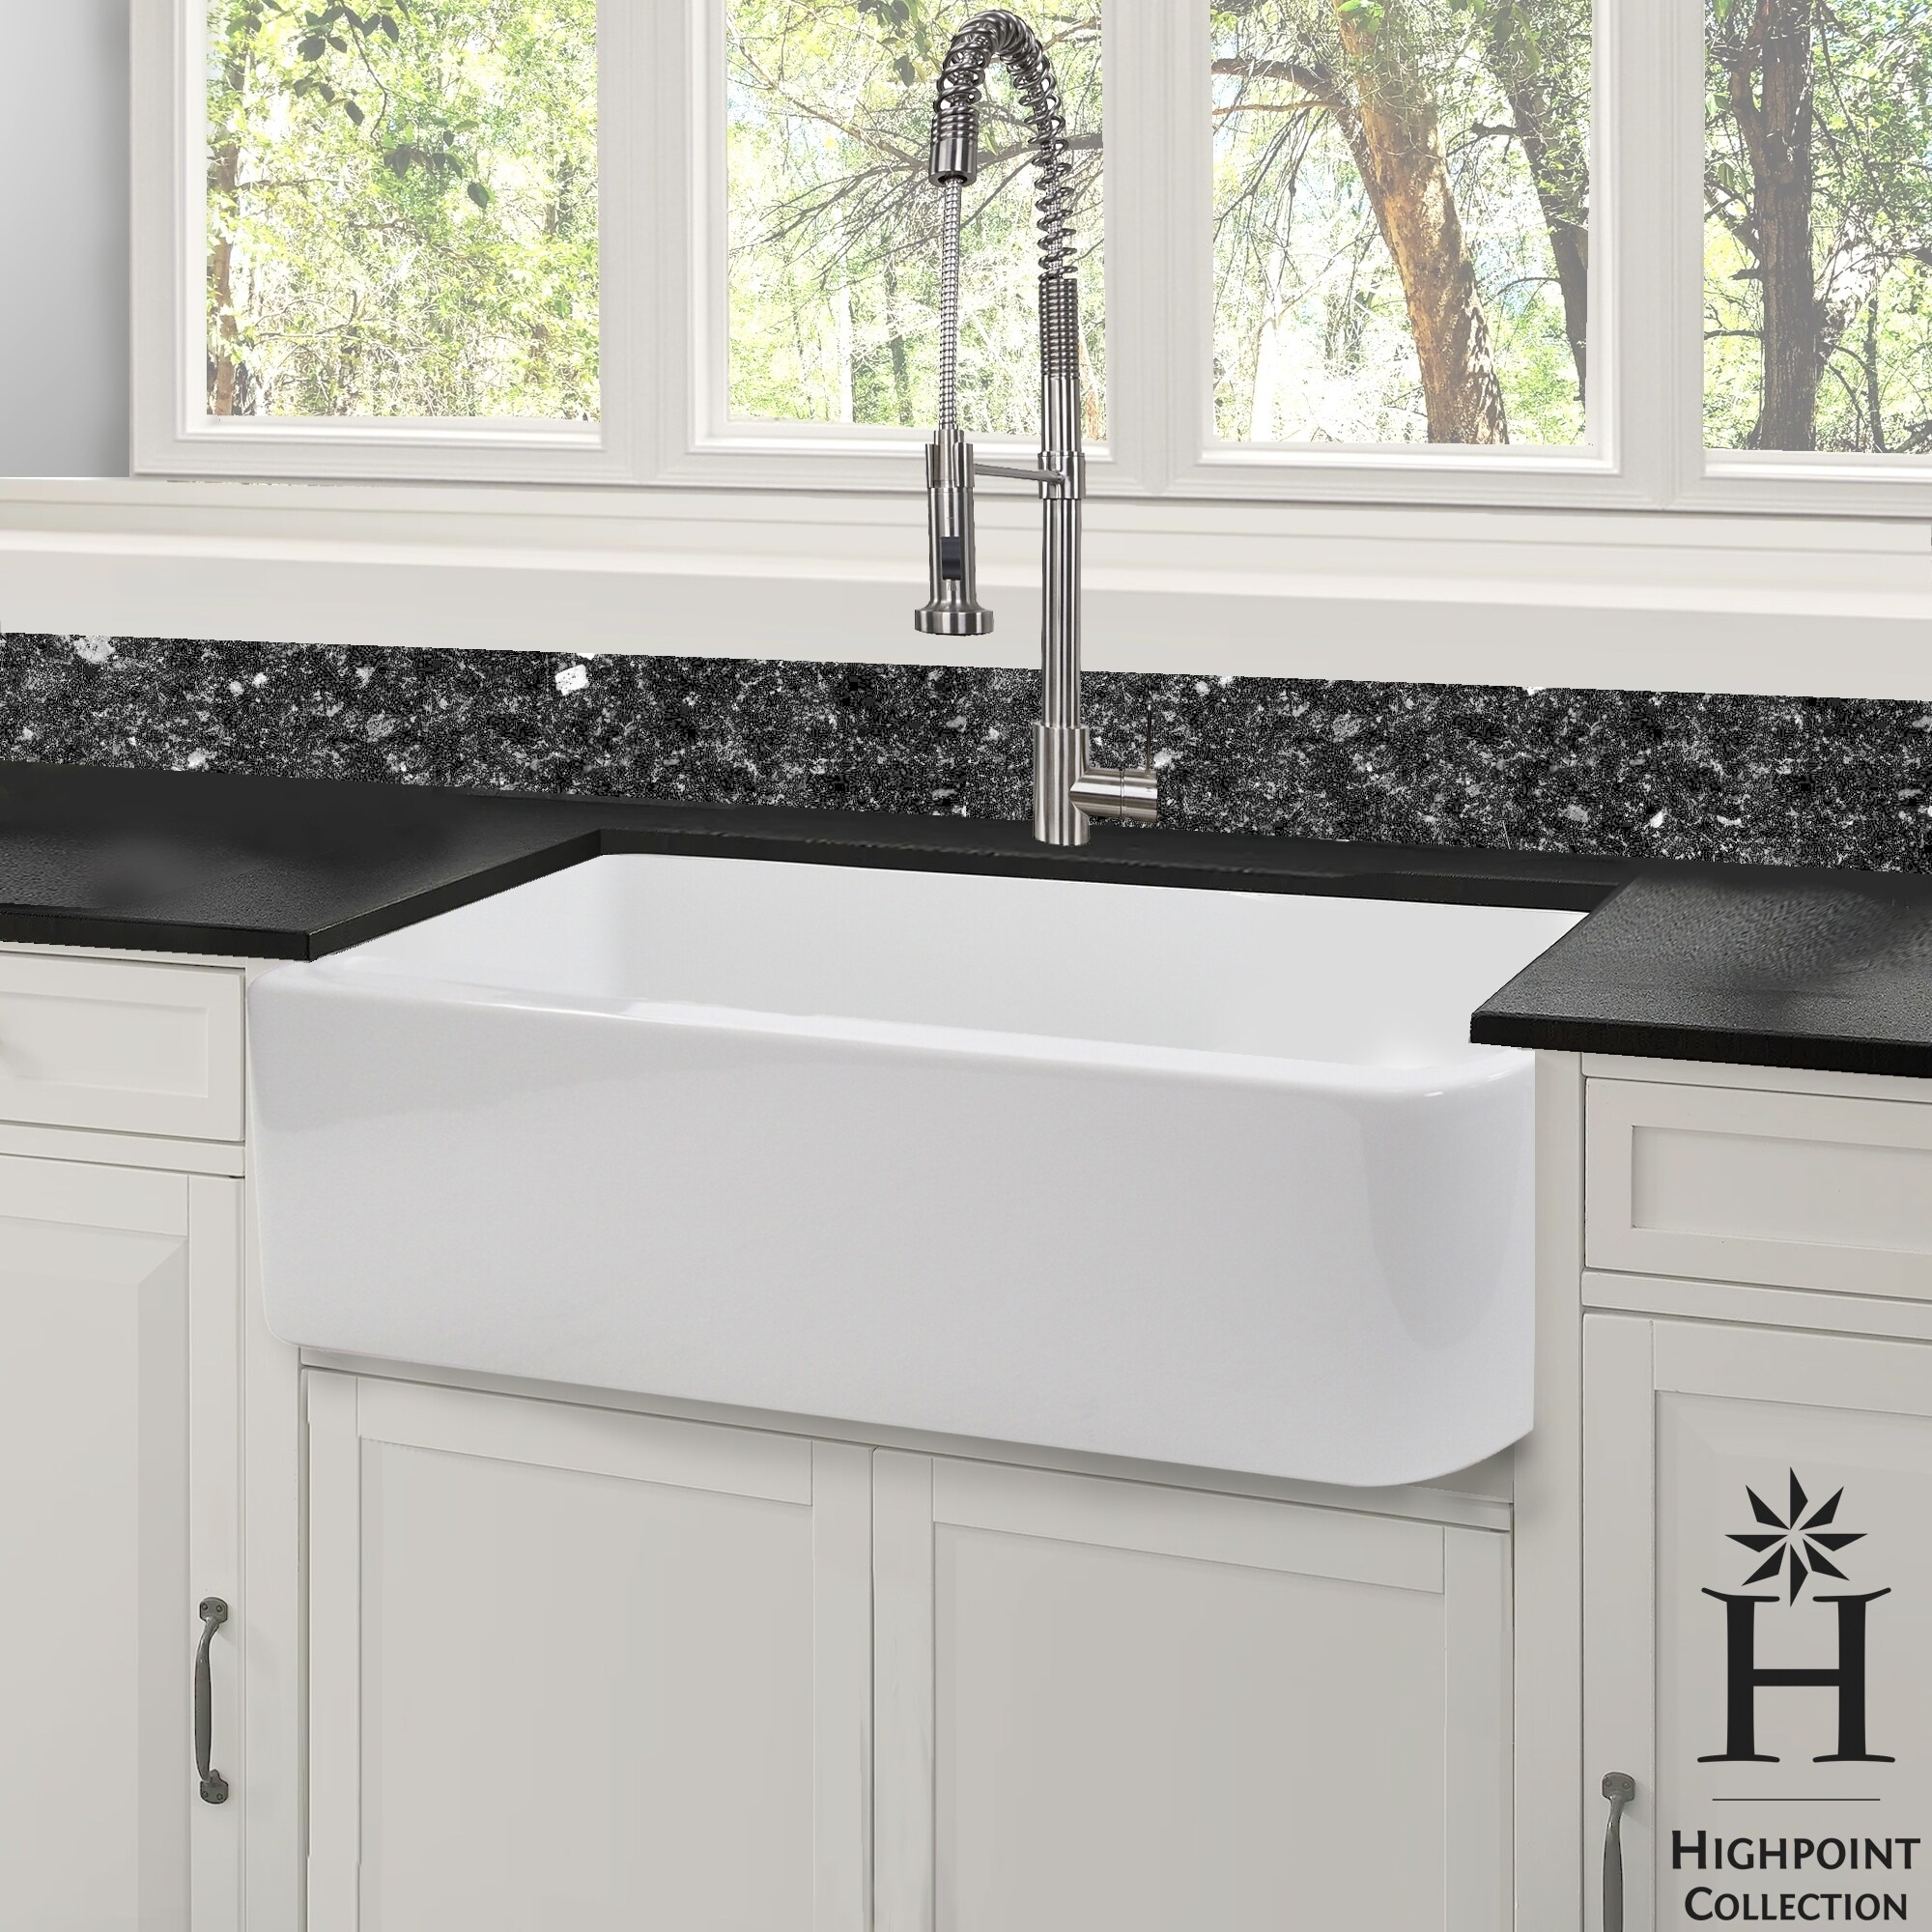 Highpoint Collection 31 Inch Fireclay White Farmhouse Sink 31 X 18 X 8 75 Inches